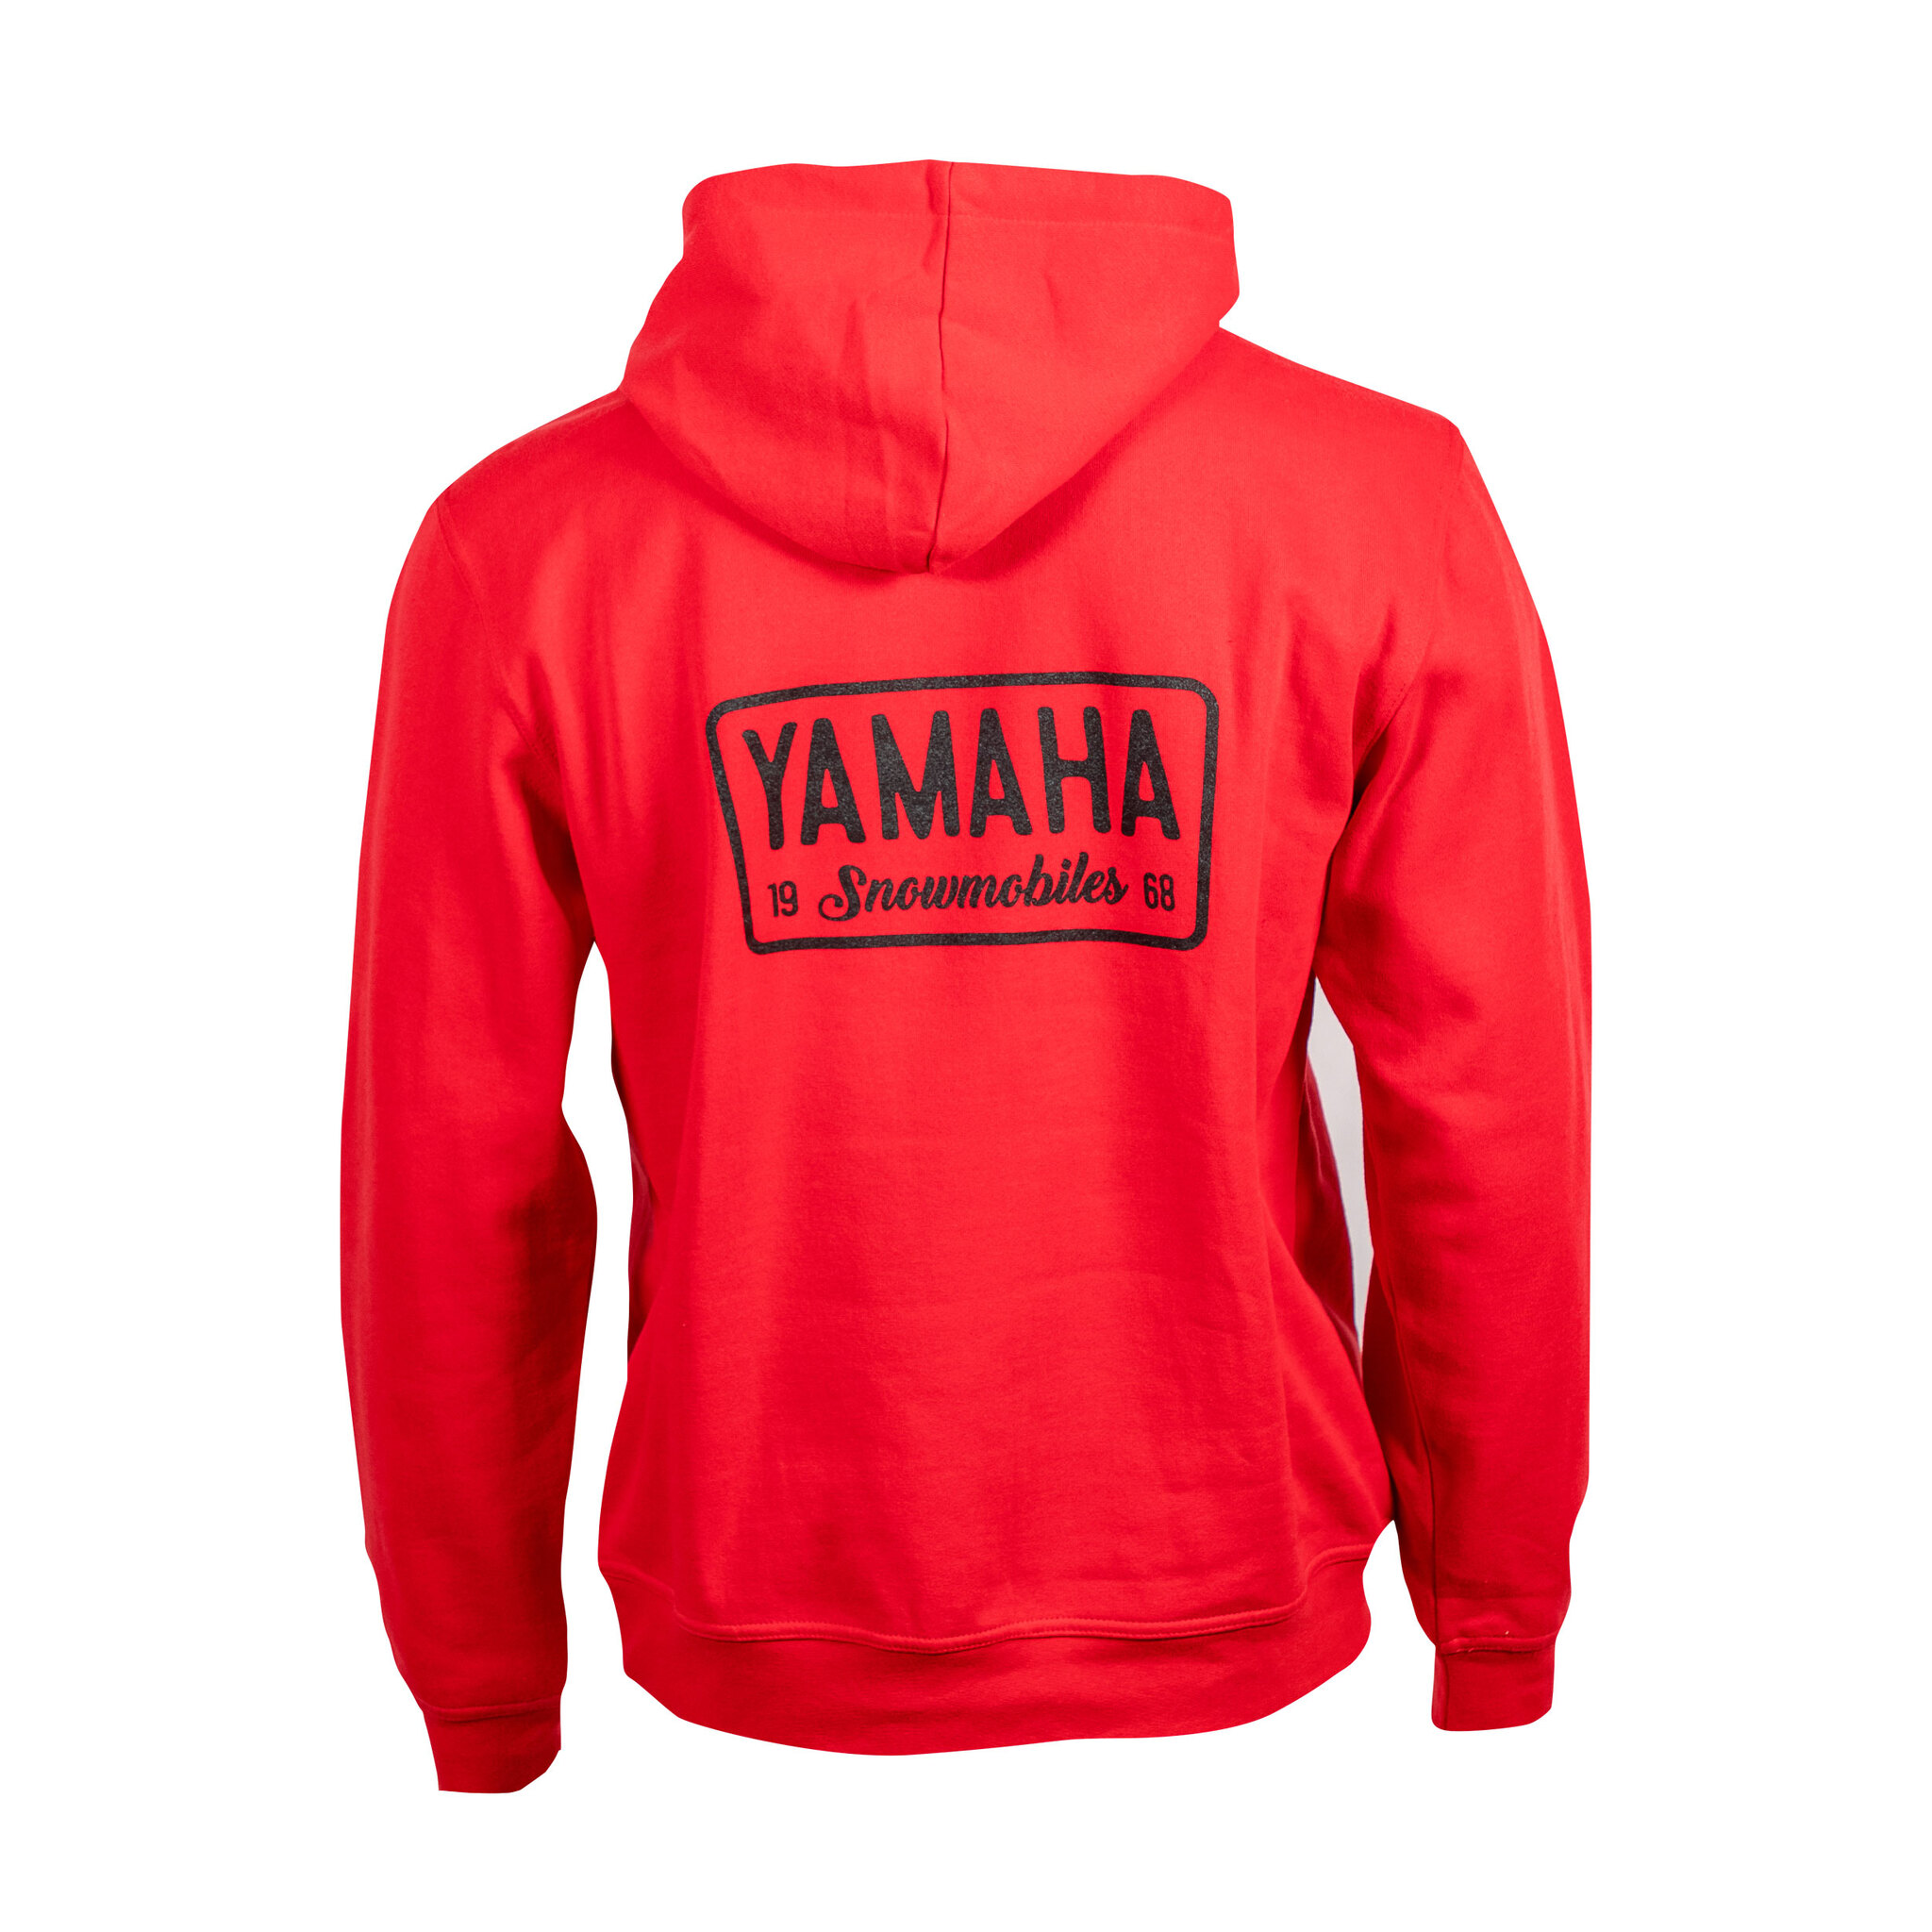 Yamaha 1968 Snowmobile Pullover Hoodie Large red